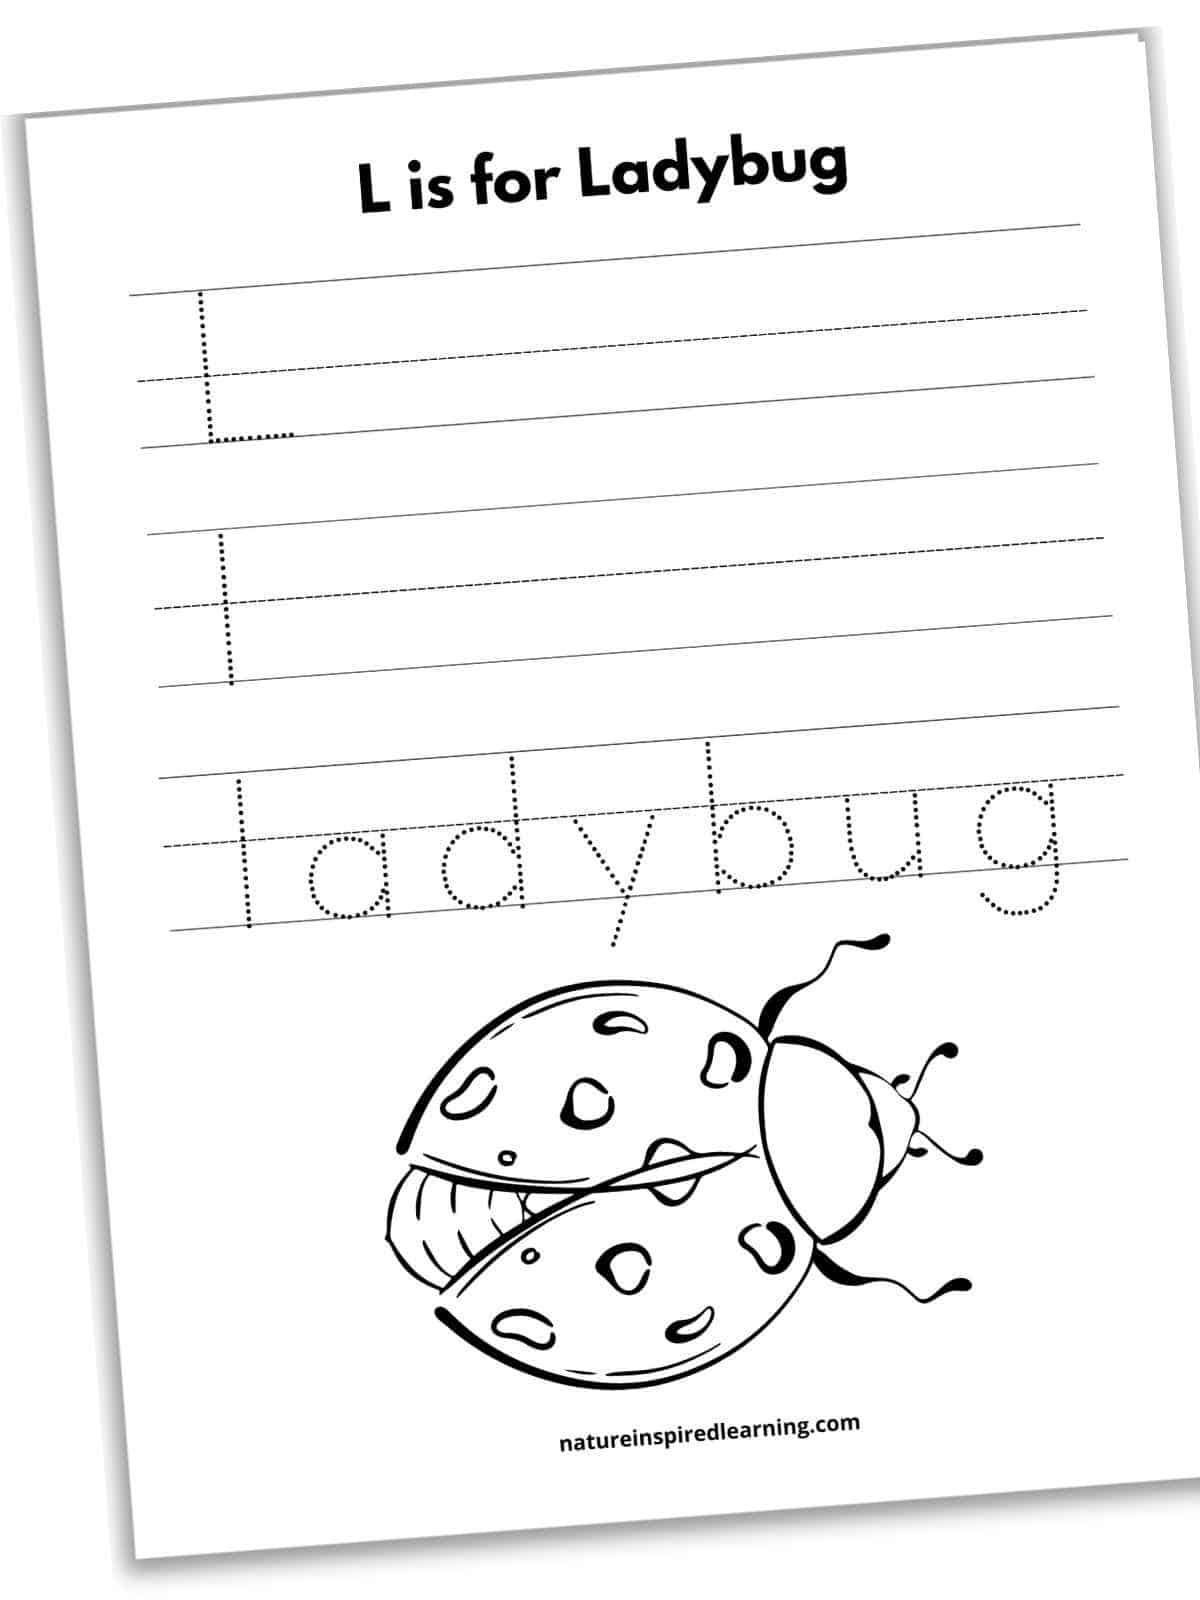 L is for Ladybug worksheet with traceable L on a set of lines above l on the second set and then dotted word ladybug on the third set of lines. Large black and white ladybug on bottom half of printable.